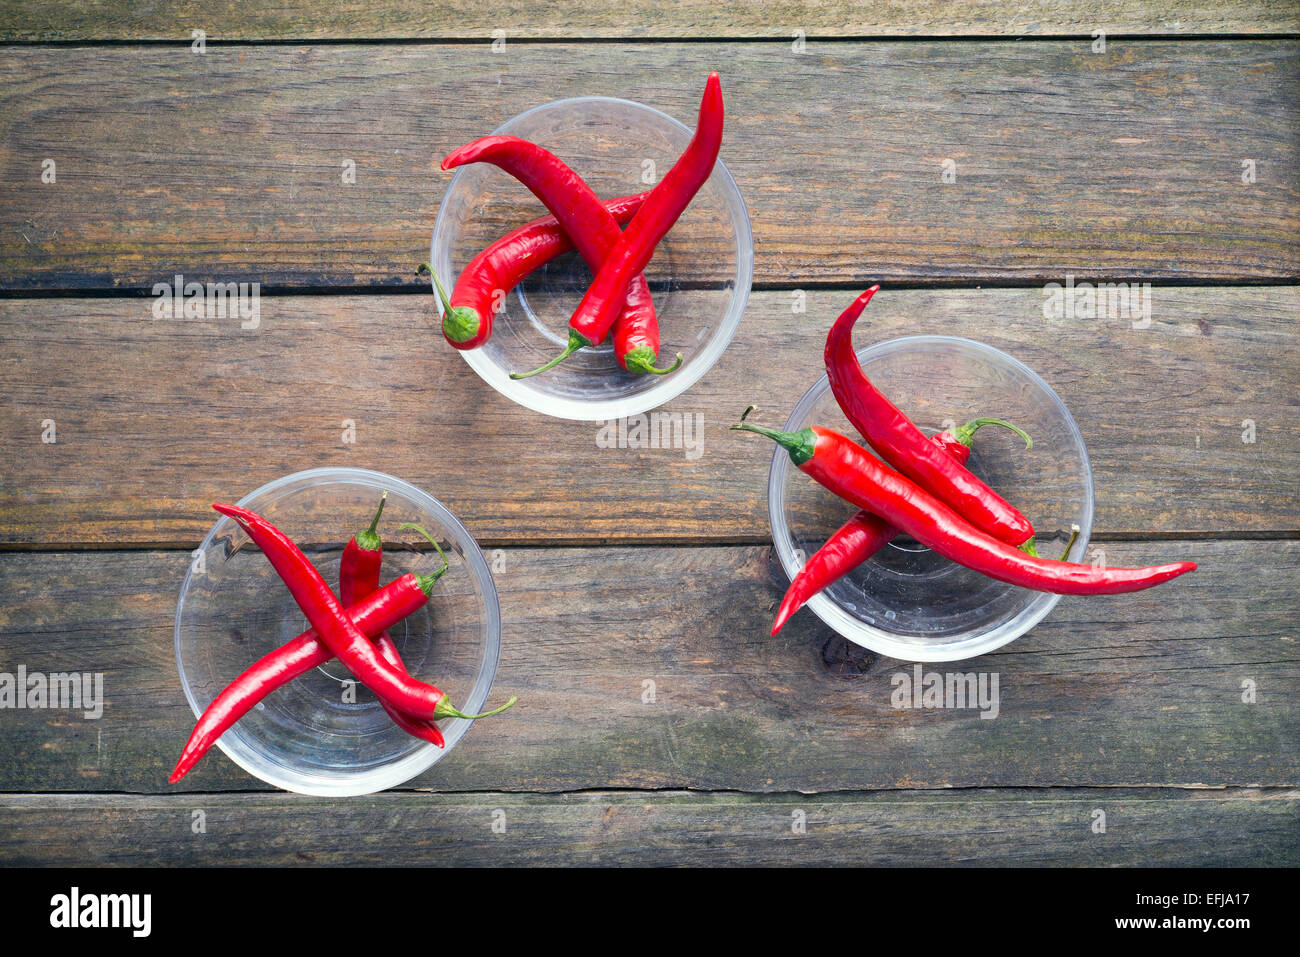 three glass bowls containing red chillies Stock Photo